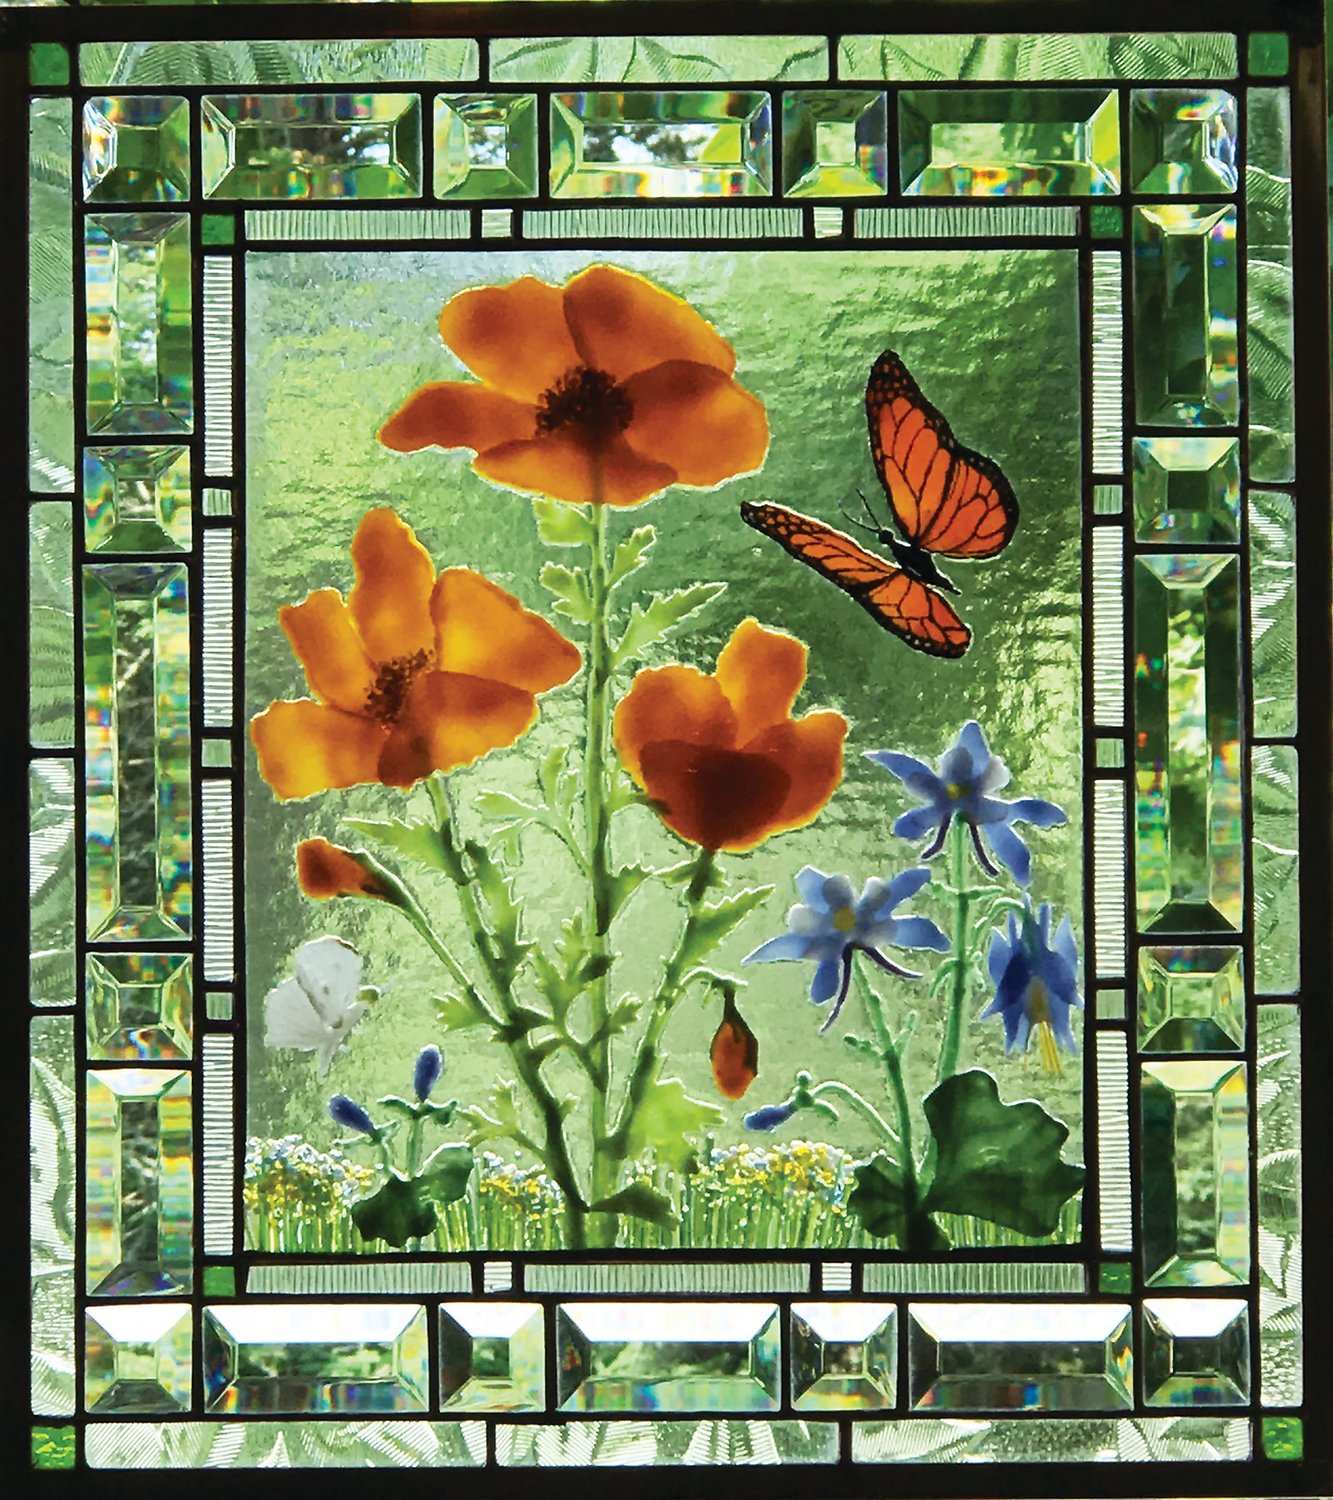 “Poppy and Monarch Butterfly”  is by Sunflower Glass Studio, one of the stops on the THAT art tour.